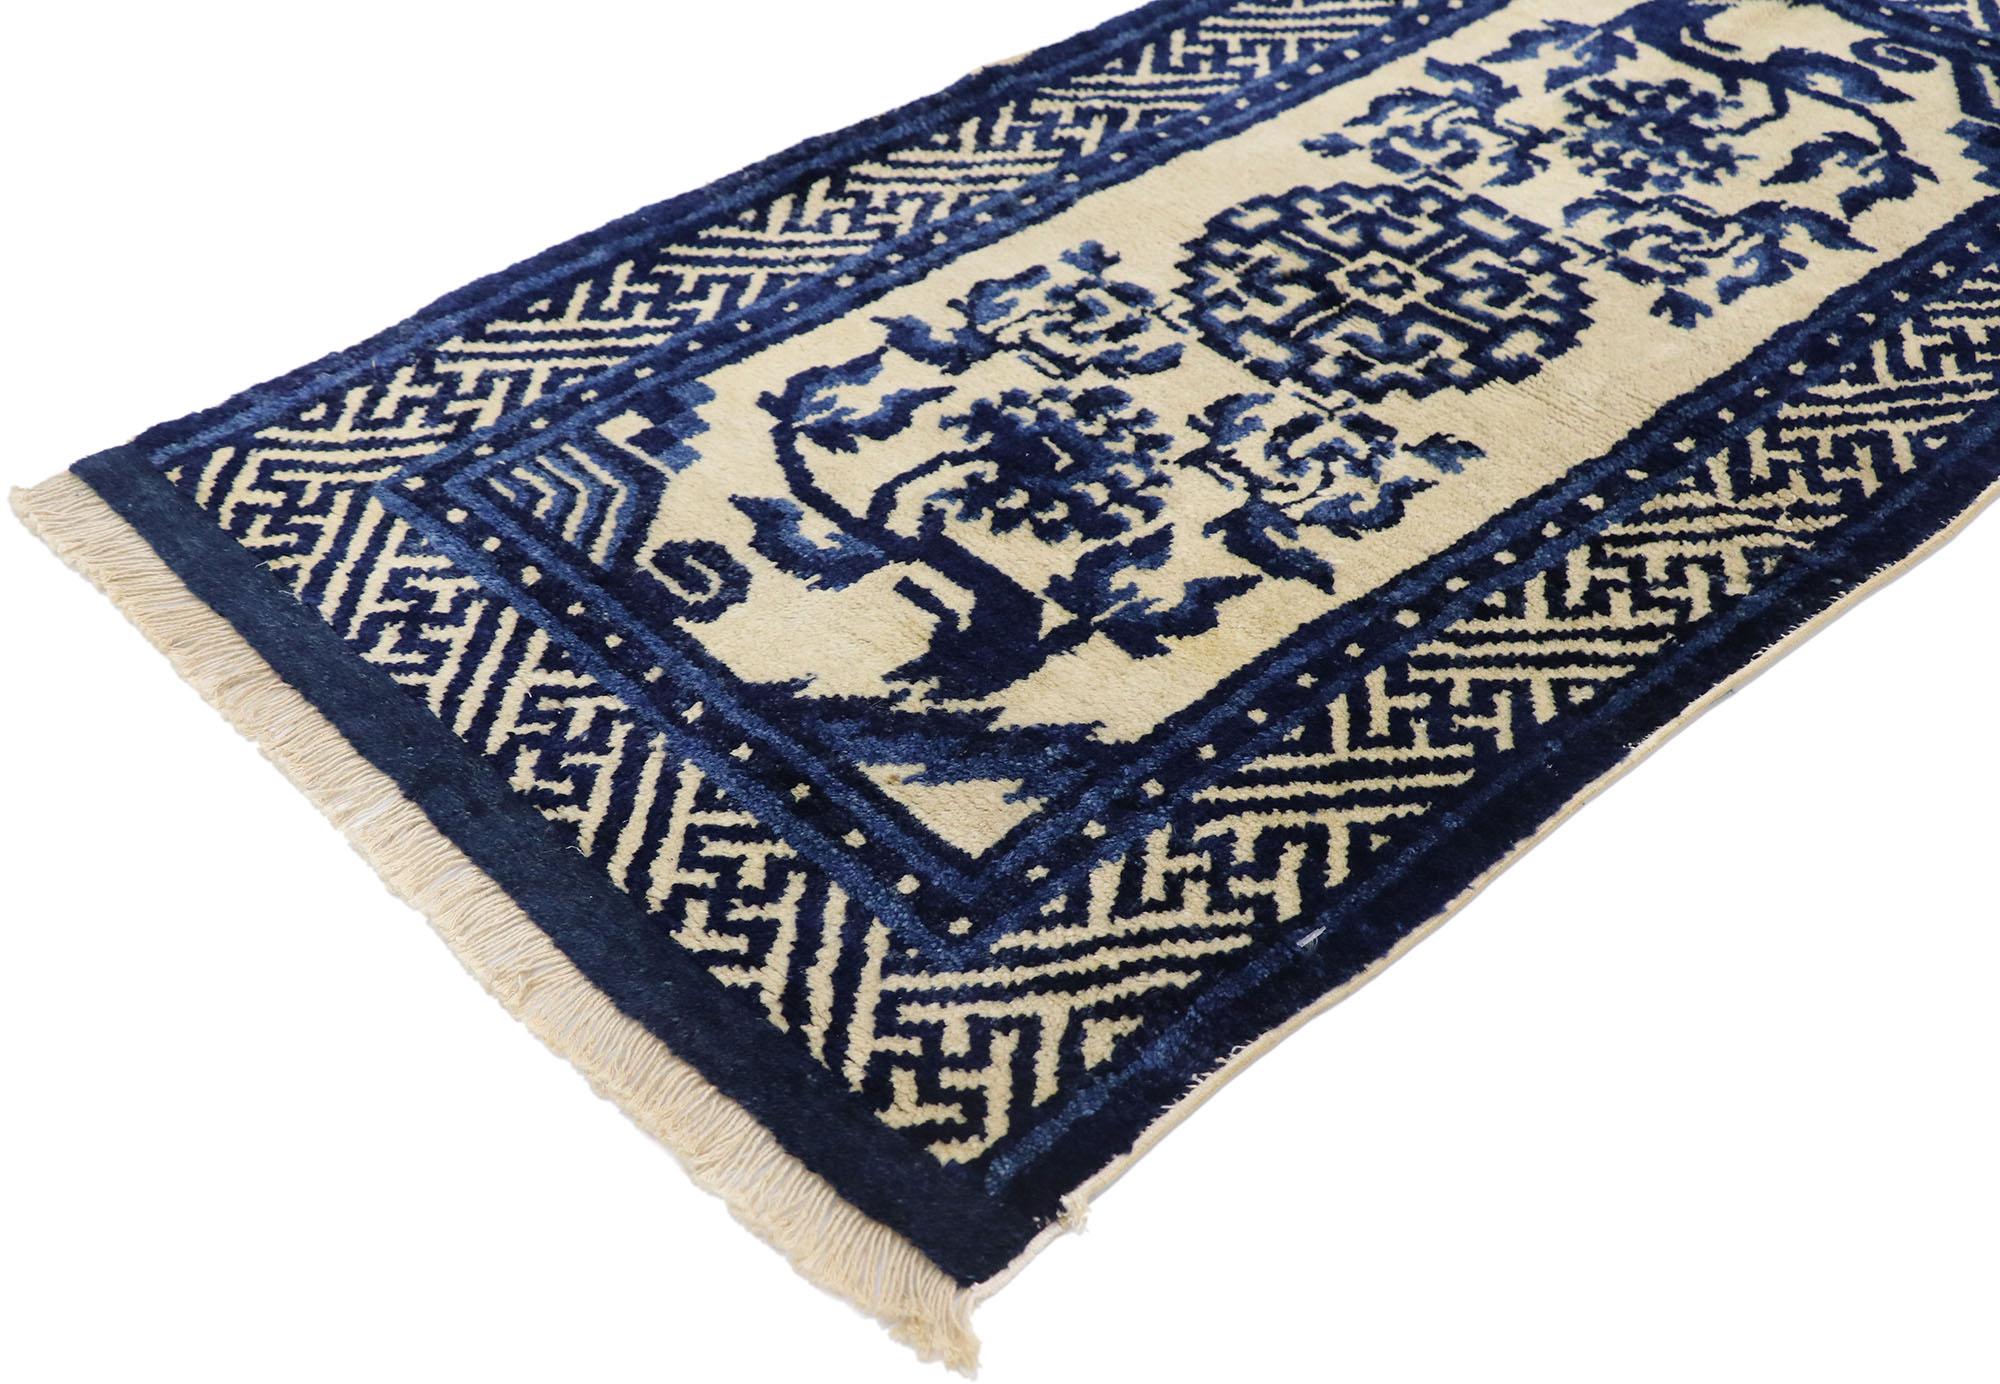 77773 antique Silk Chinese Peking rug with Modern Chinoiserie style 02'01 x 04'00. This hand-knotted silk antique Chinese Peking rug features a rounded open center fretwork medallion enclosing a center rosette. Graceful stylized floral motifs